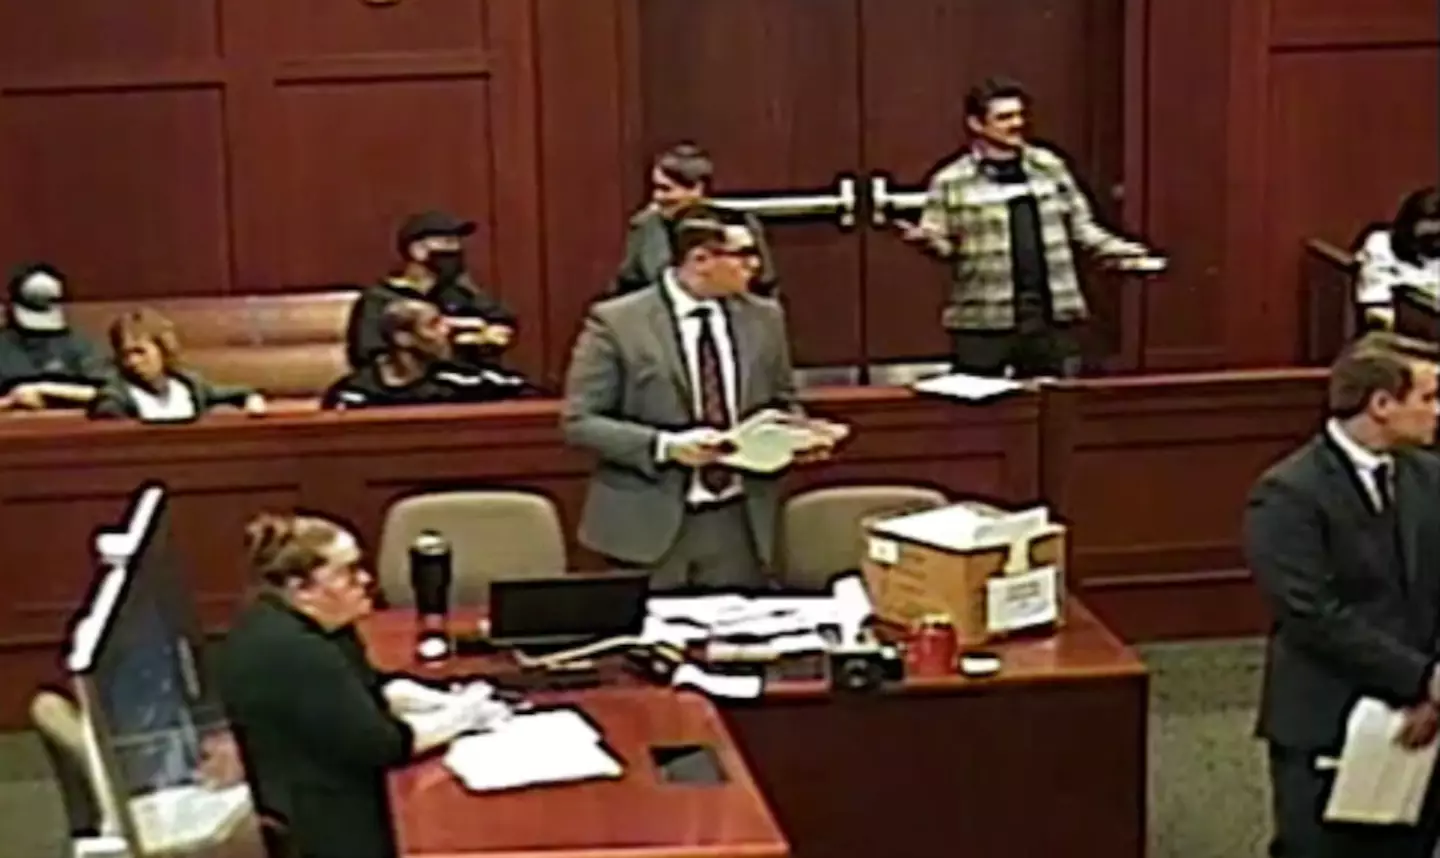 Kevin Newton was called an 'a**hole' by the judge.